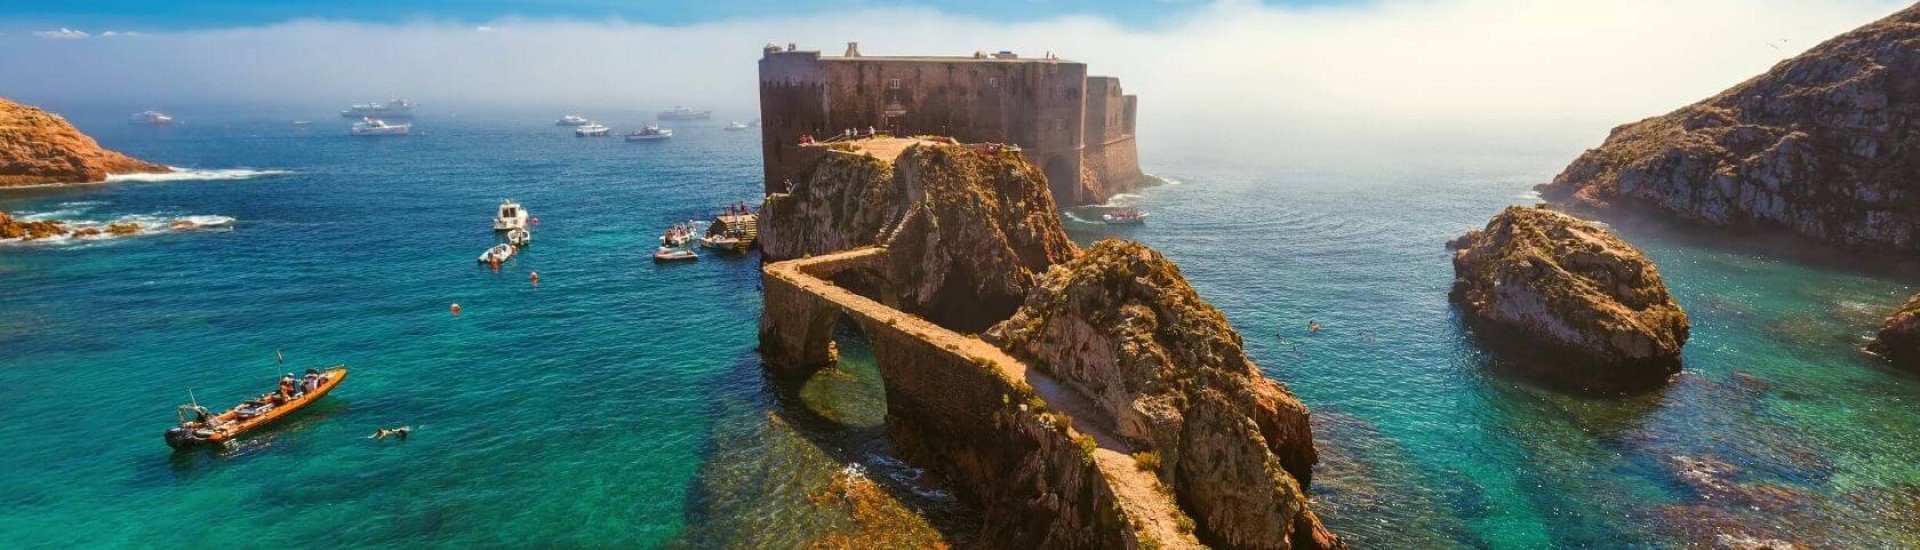 portugal castle ruins in the middle of the sea with crystal clear waters